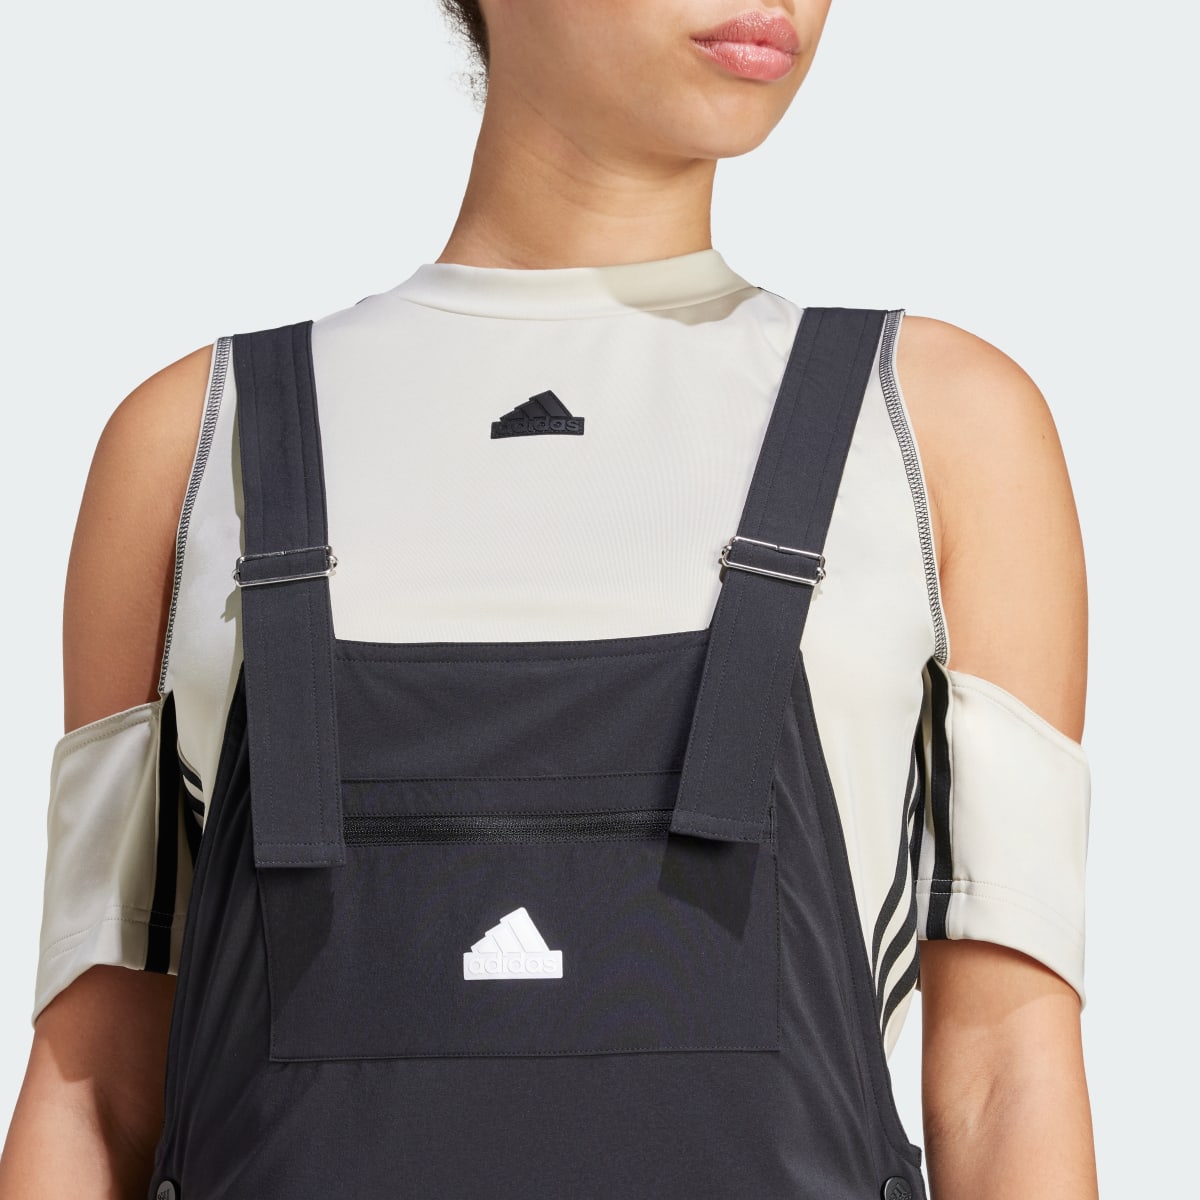 Adidas Dance All-Gender Dungarees. 5